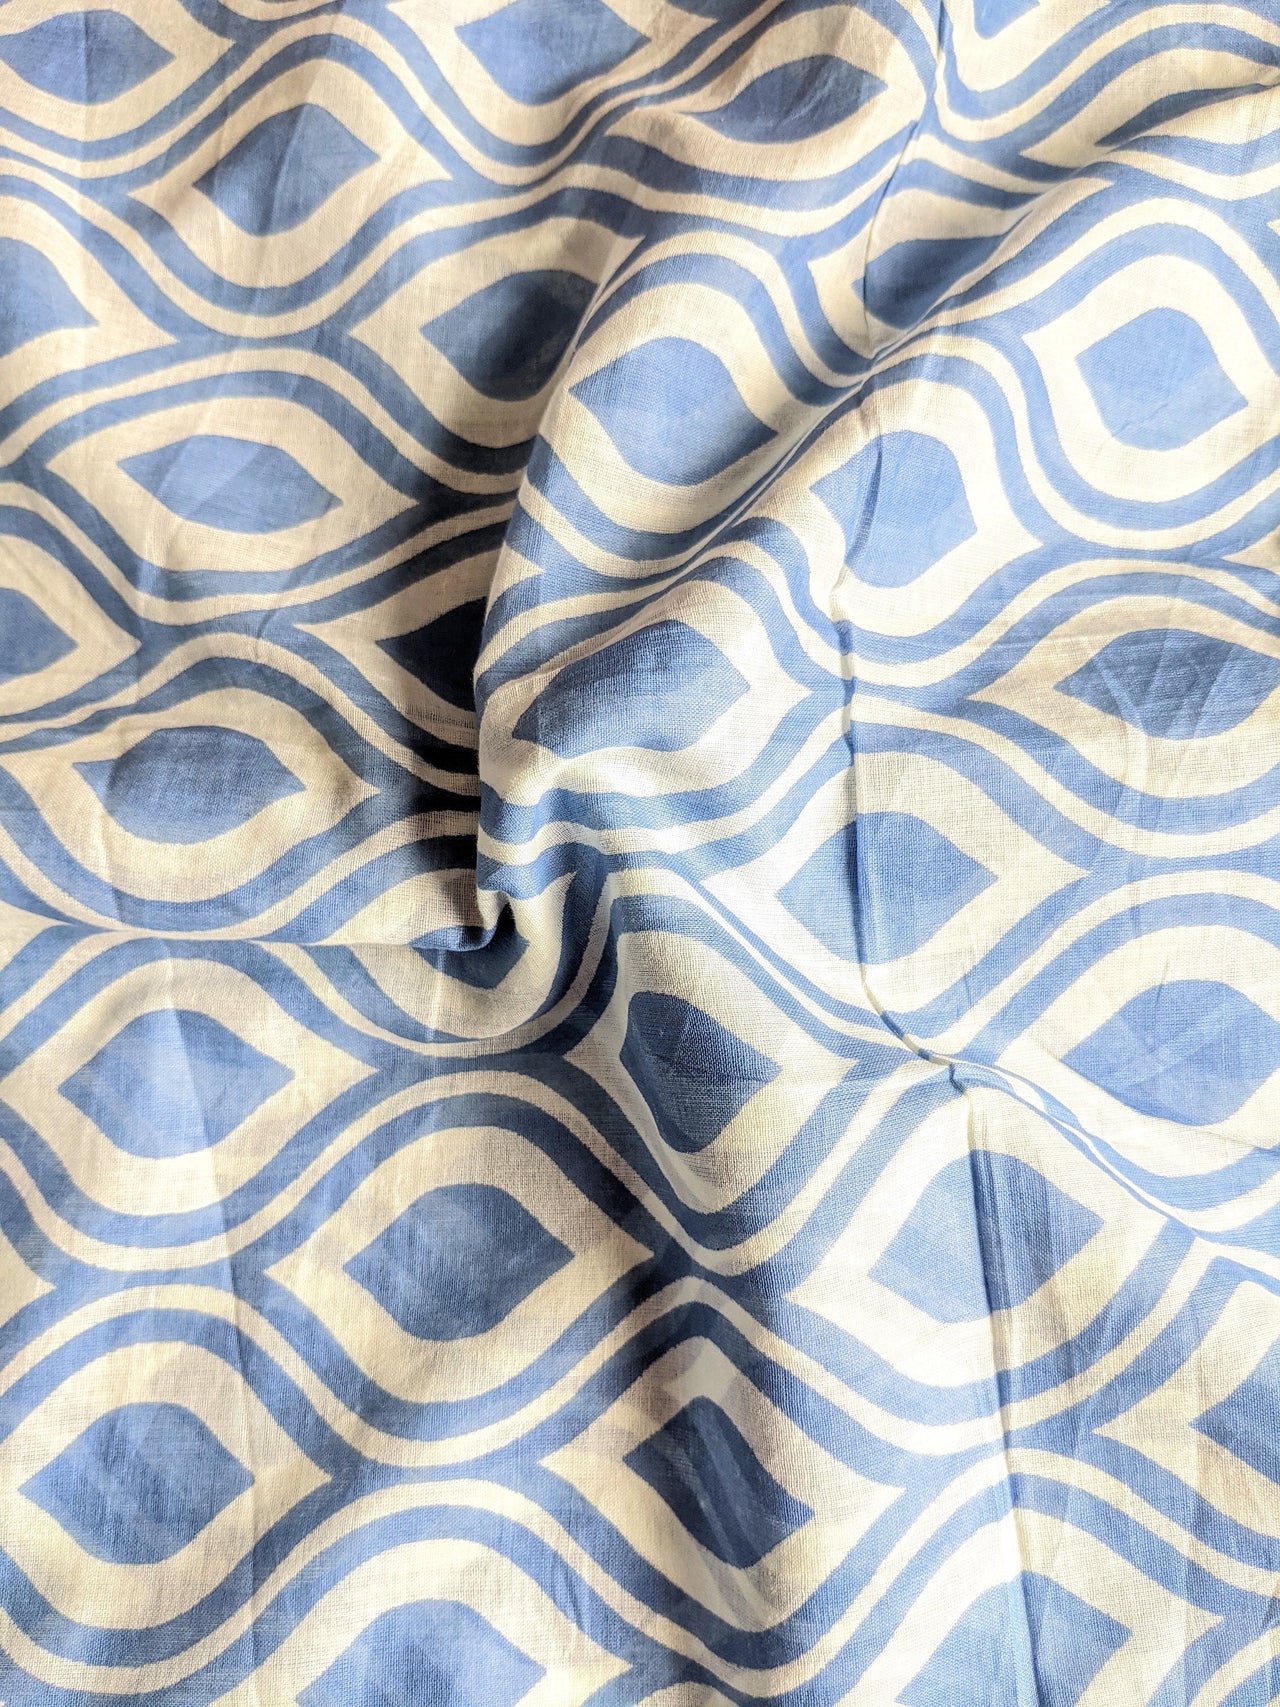 Blue and White Printed Cotton Muslin Fabric, Sewing Fabric, Fabric By Metre / Half Metre